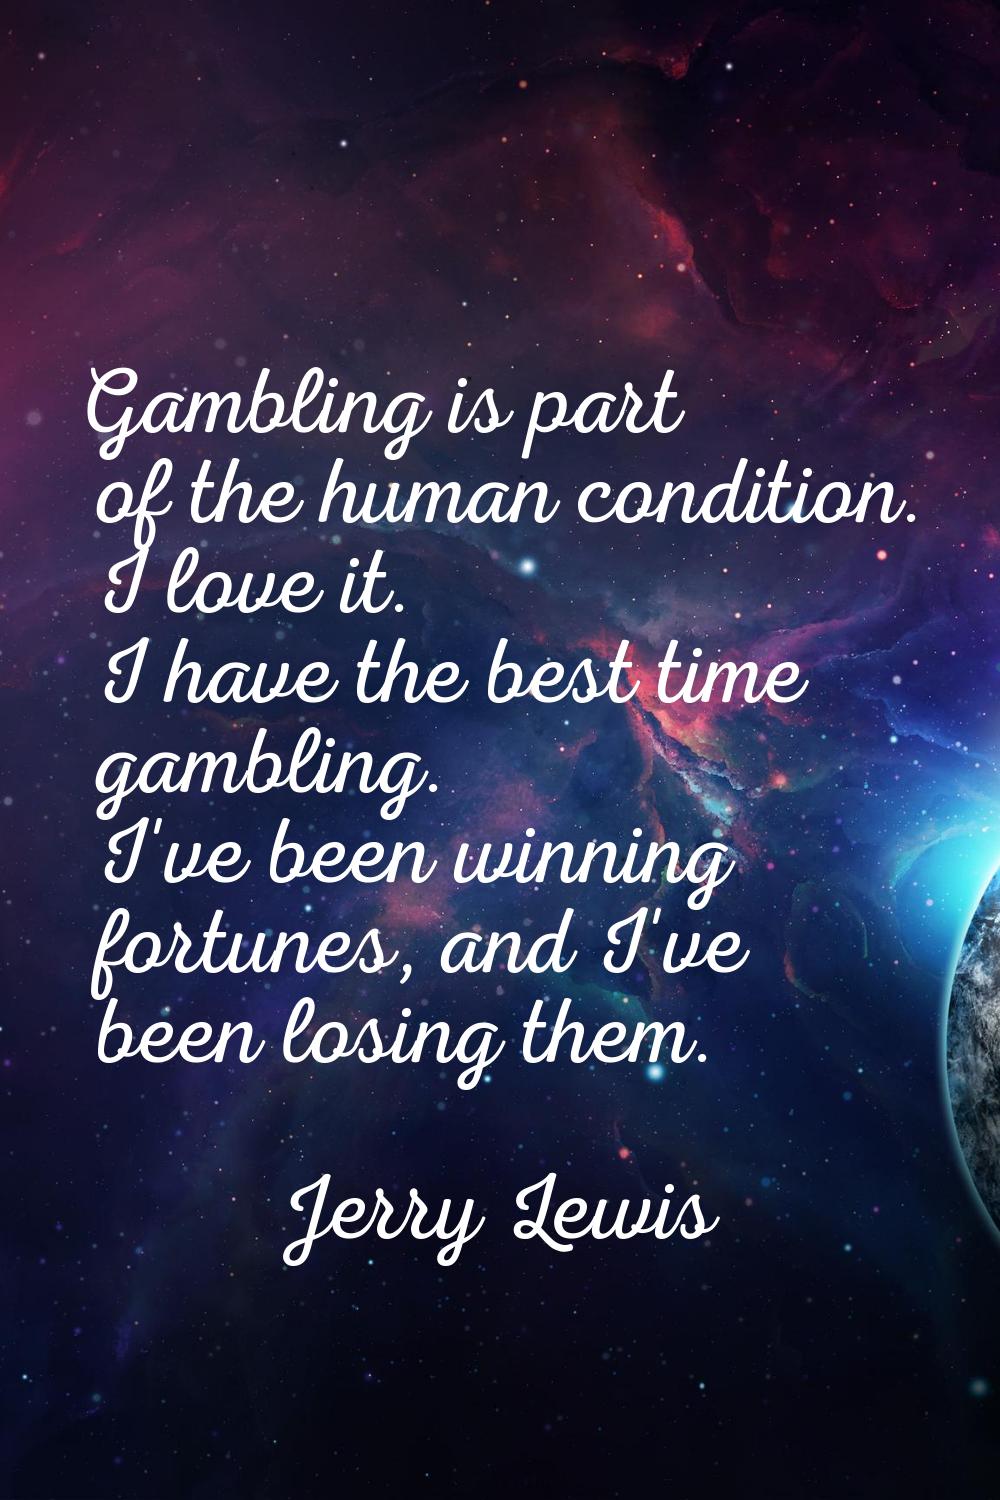 Gambling is part of the human condition. I love it. I have the best time gambling. I've been winnin